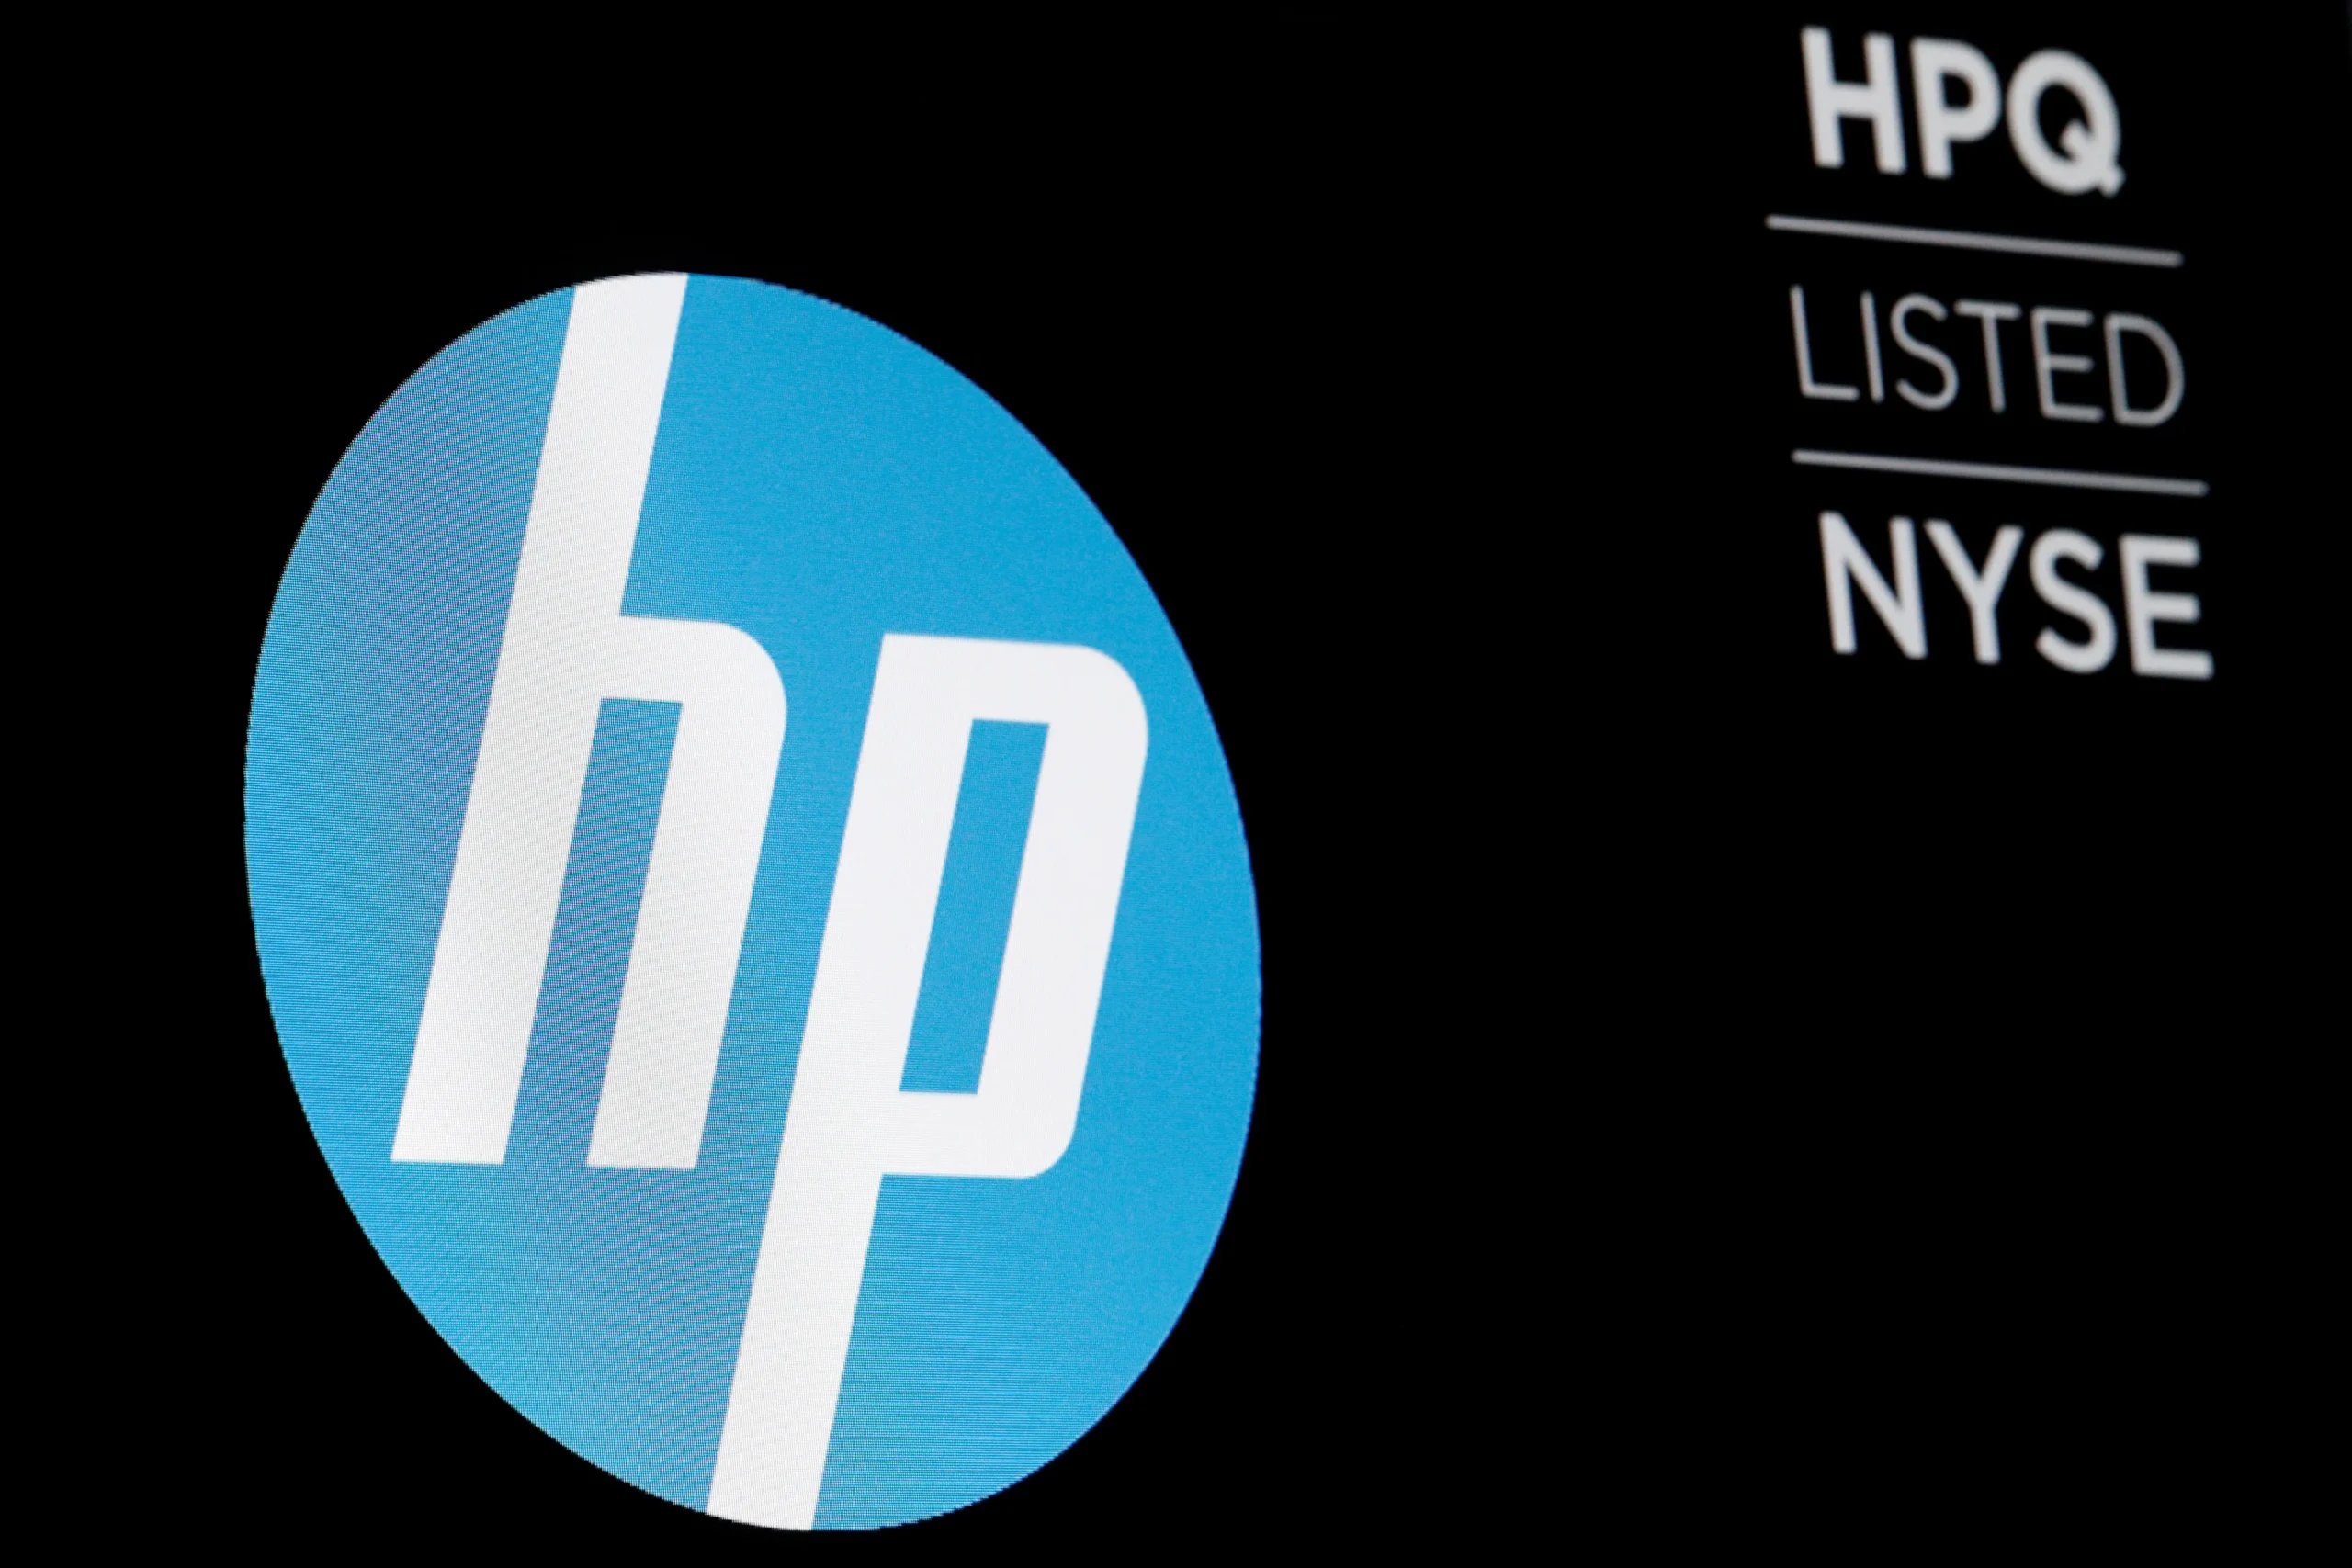 hewlett packard agency of record - What is an agency of record agreement